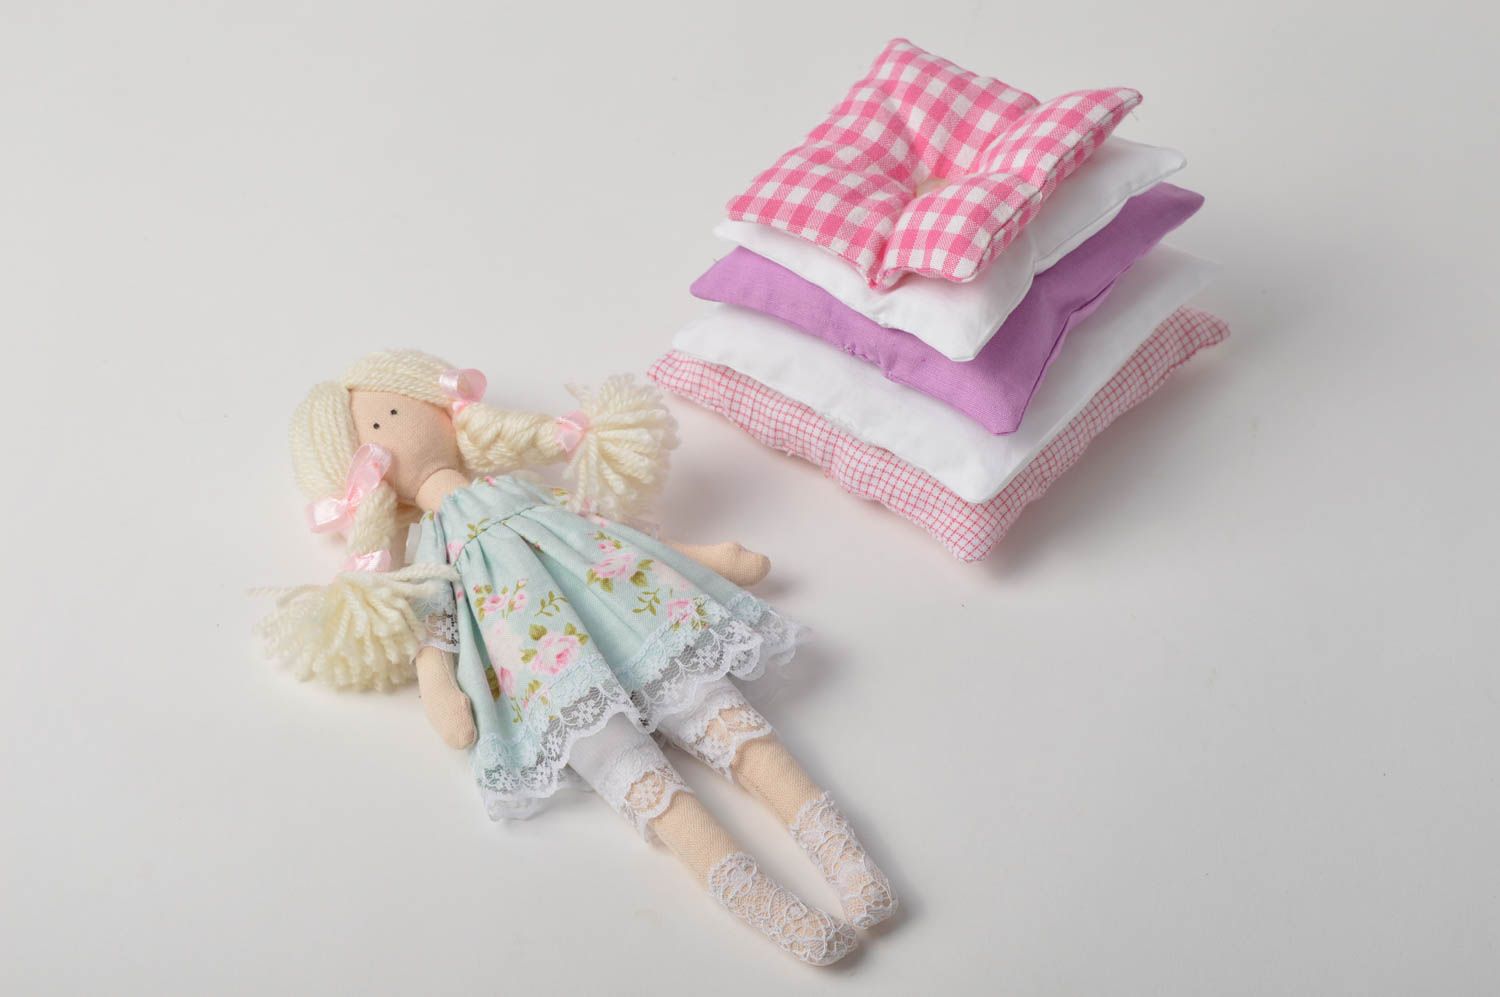 Handmade doll designer doll unusual gift for baby doll with pillow decor ideas photo 2